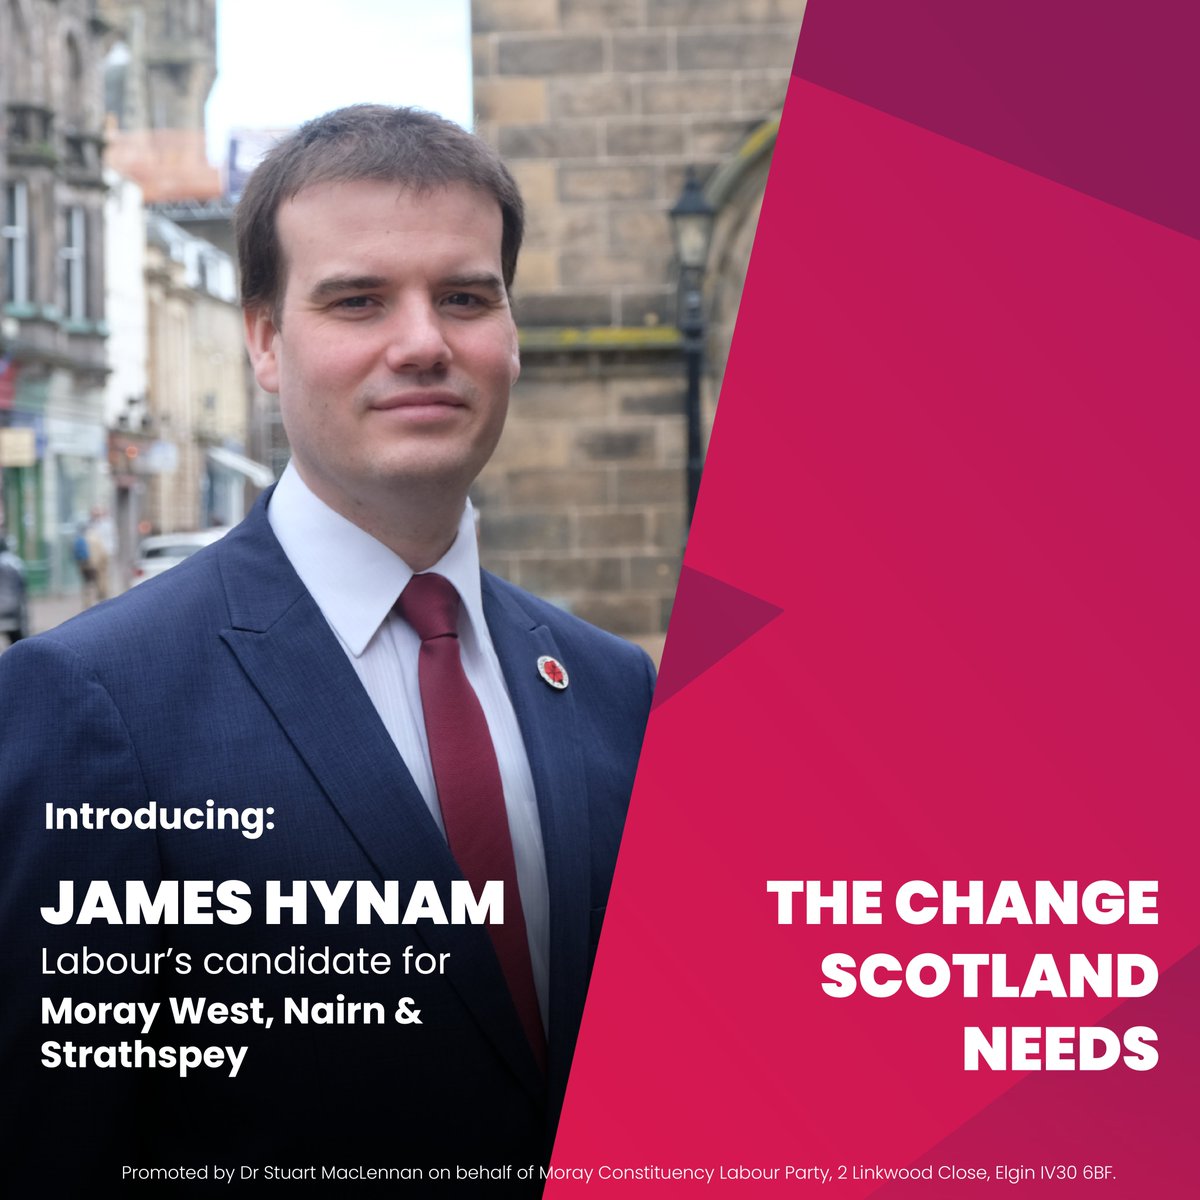 🚨 Candidate Announcement 🚨 We are pleased to announce that James Hynam is Labour's candidate for the new seat of Moray West, Nairn, and Strathspey. Polls show Labour is the main challenger in this seat. If you can afford to, please consider donating: gofund.me/e2f42697